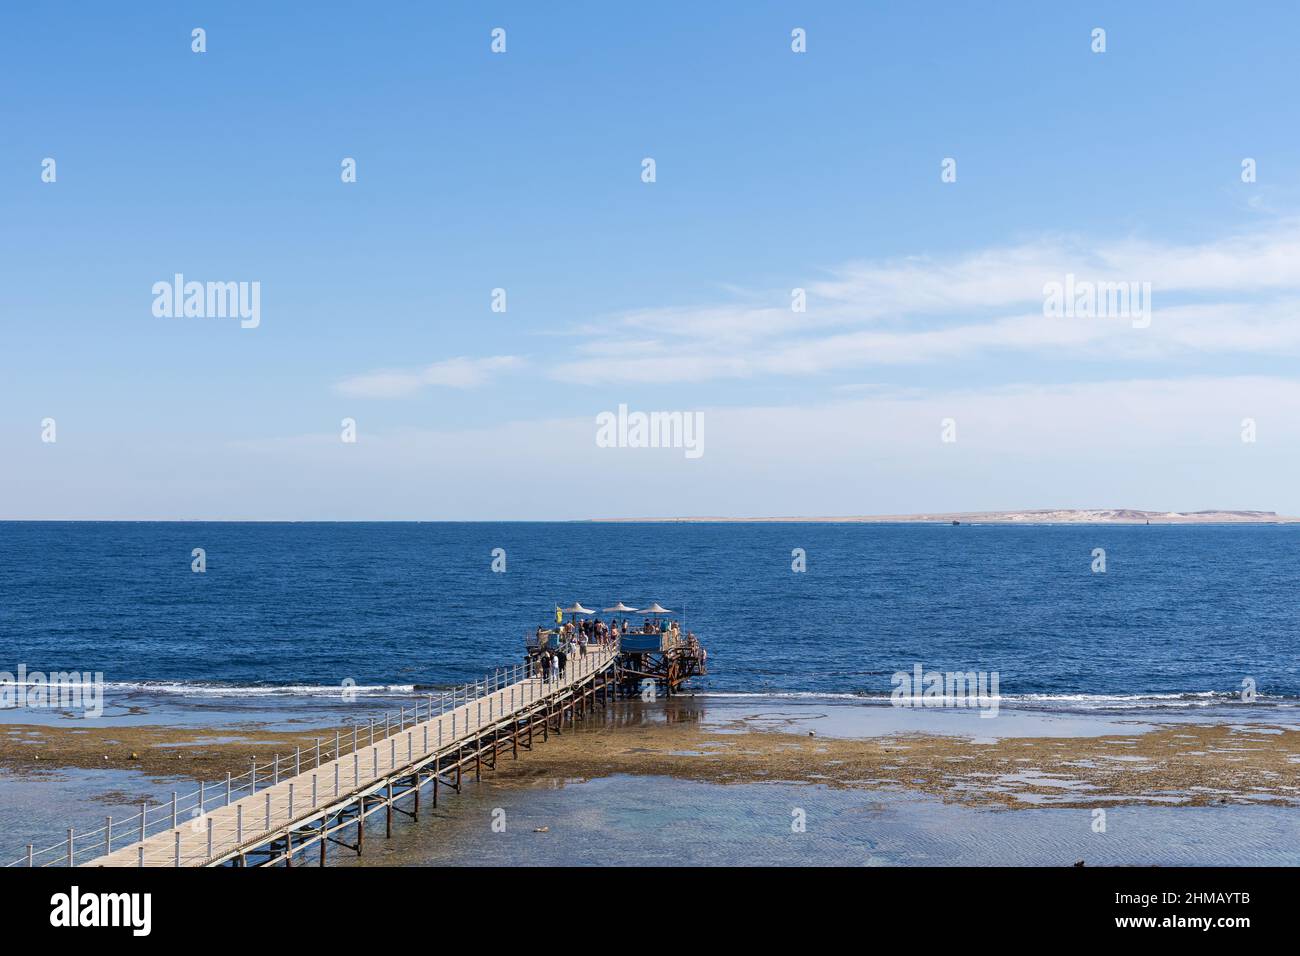 Dilapidated Pier in the Red Sea. Tiran Island on Backdrop. Stock Photo